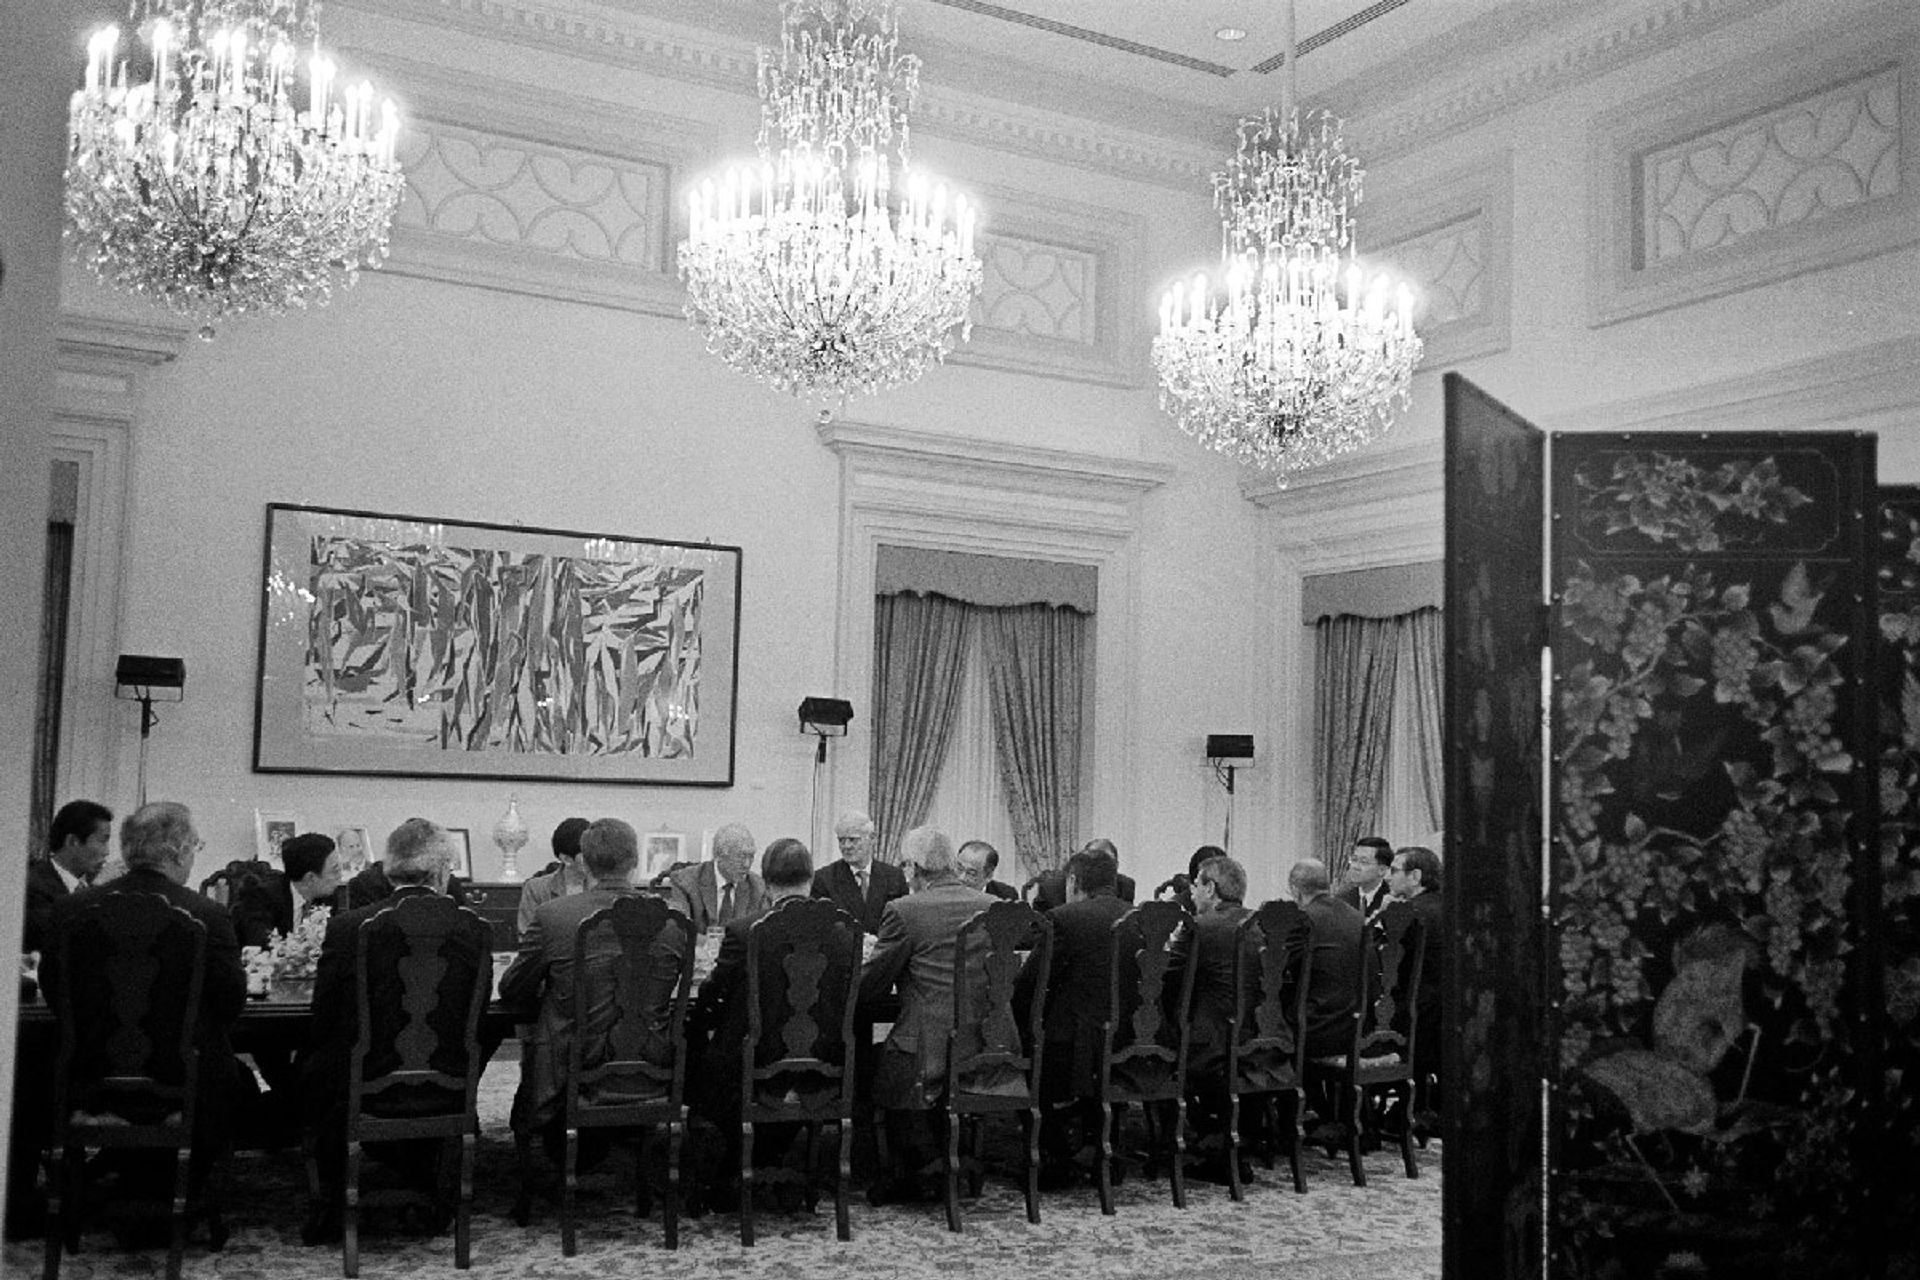 After stepping down as prime minister, Mr Lee continued to work at the Istana, where he held meetings in his office, among other rooms, and received foreign dignitaries and officials. In this photo, Mr Lee is meeting the board of Standard Chartered Bank at the Sheares Room in 2001. ST Photo: George Gascon